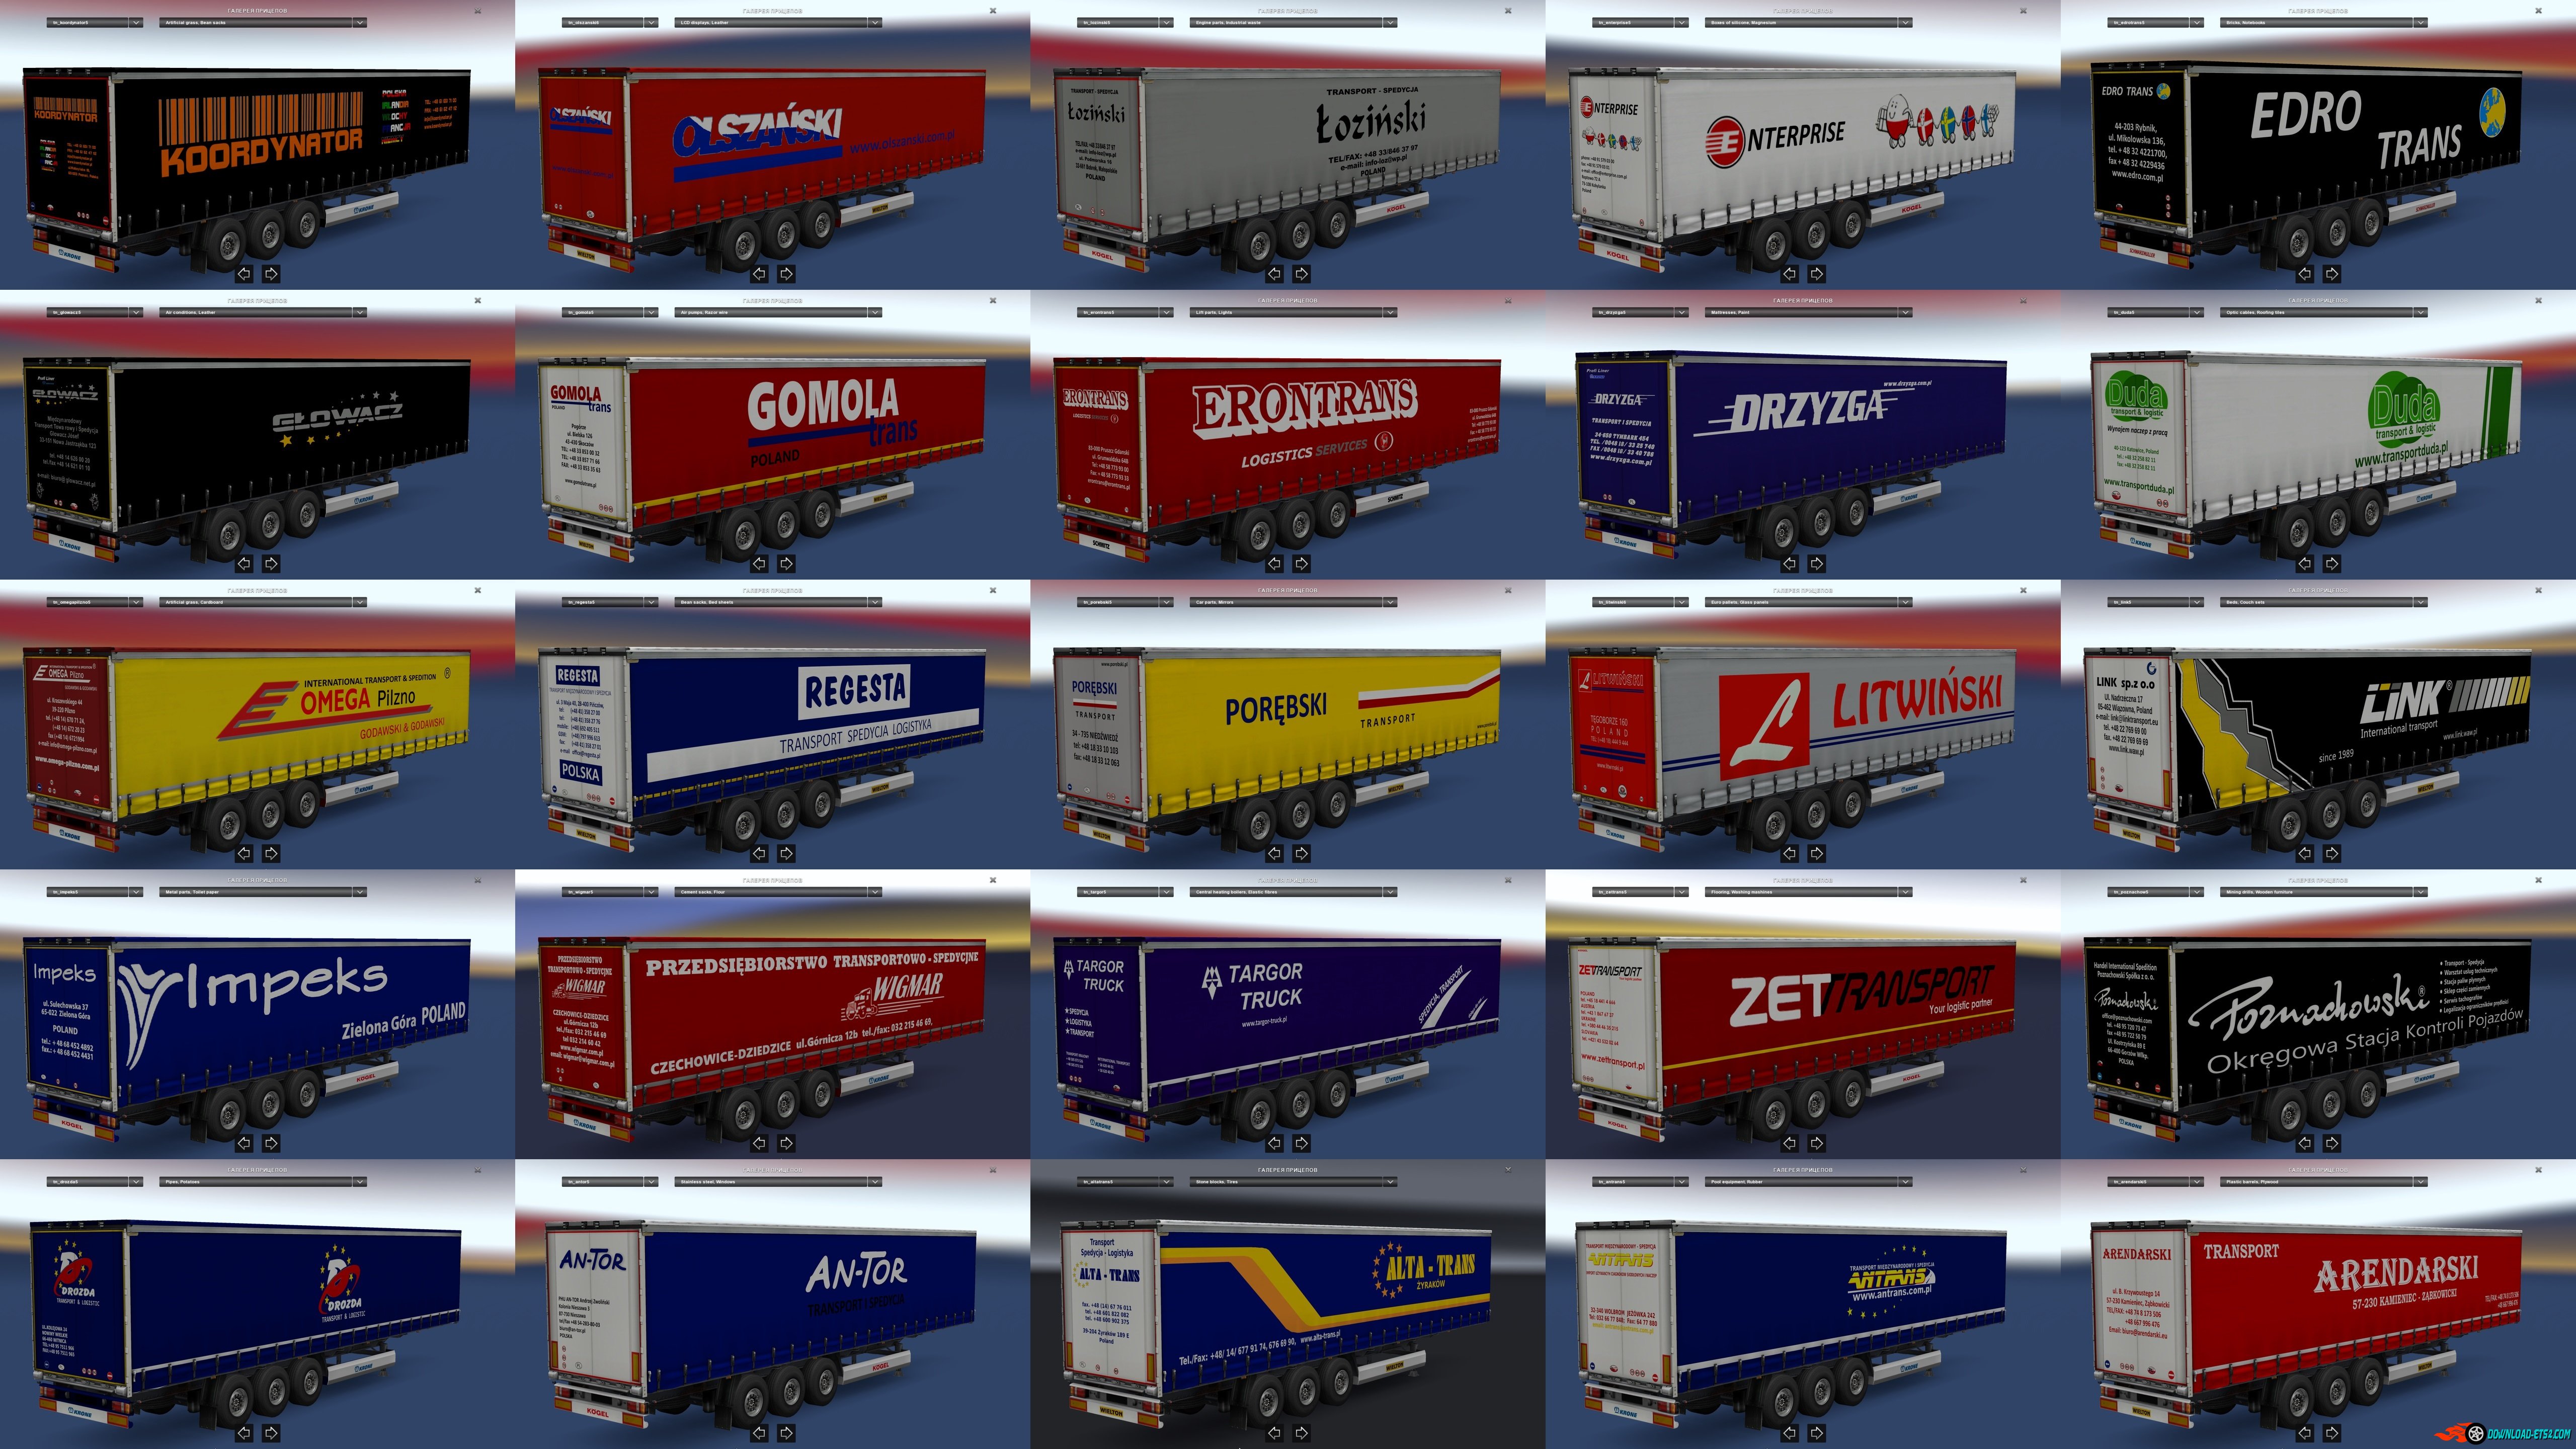 "Poland" Trailers Pack (25 pieces)